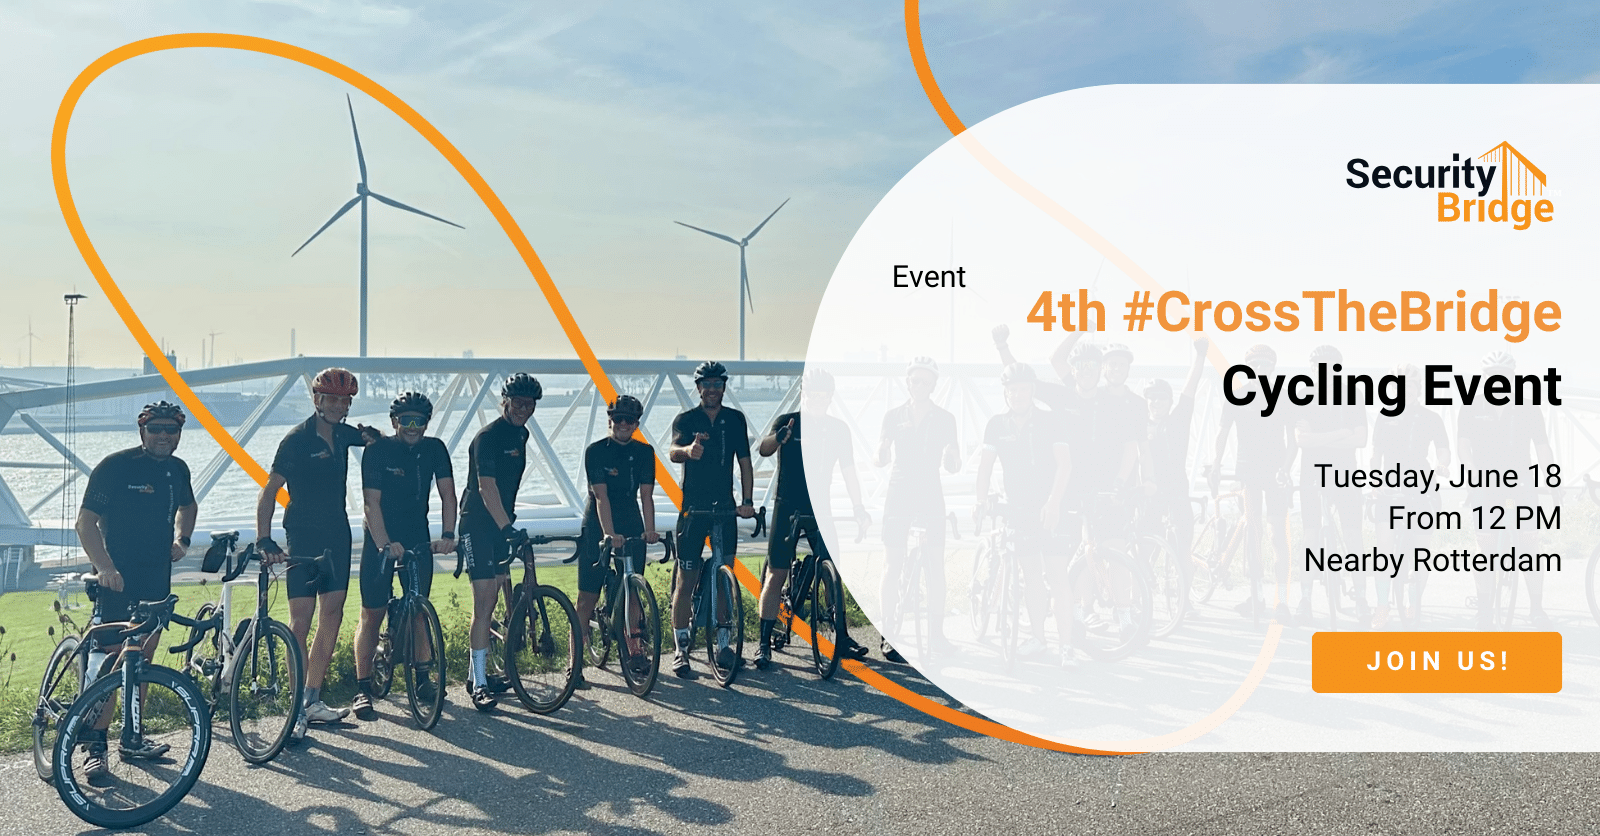 Join our 4th #CrossTheBridge Cycling Event!